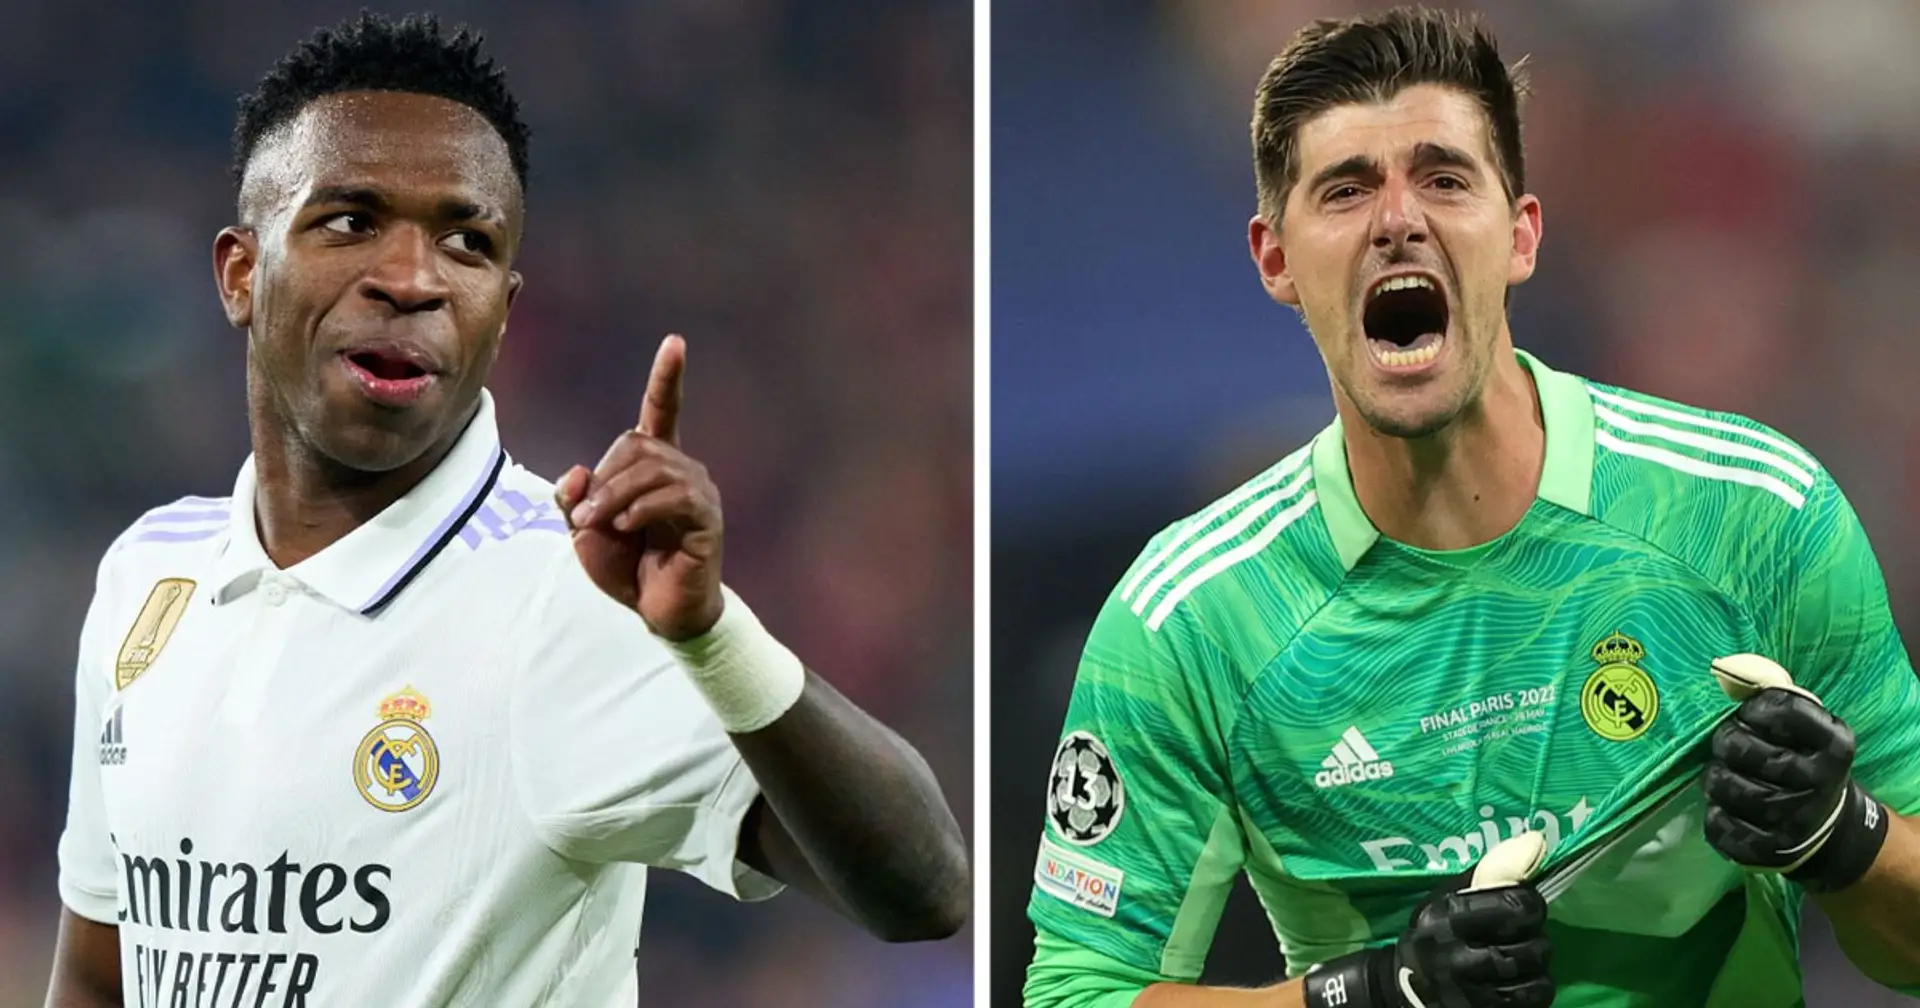 Vini rejects Madrid's offer to wear no.7 shirt and 2 more big stories you could've missed